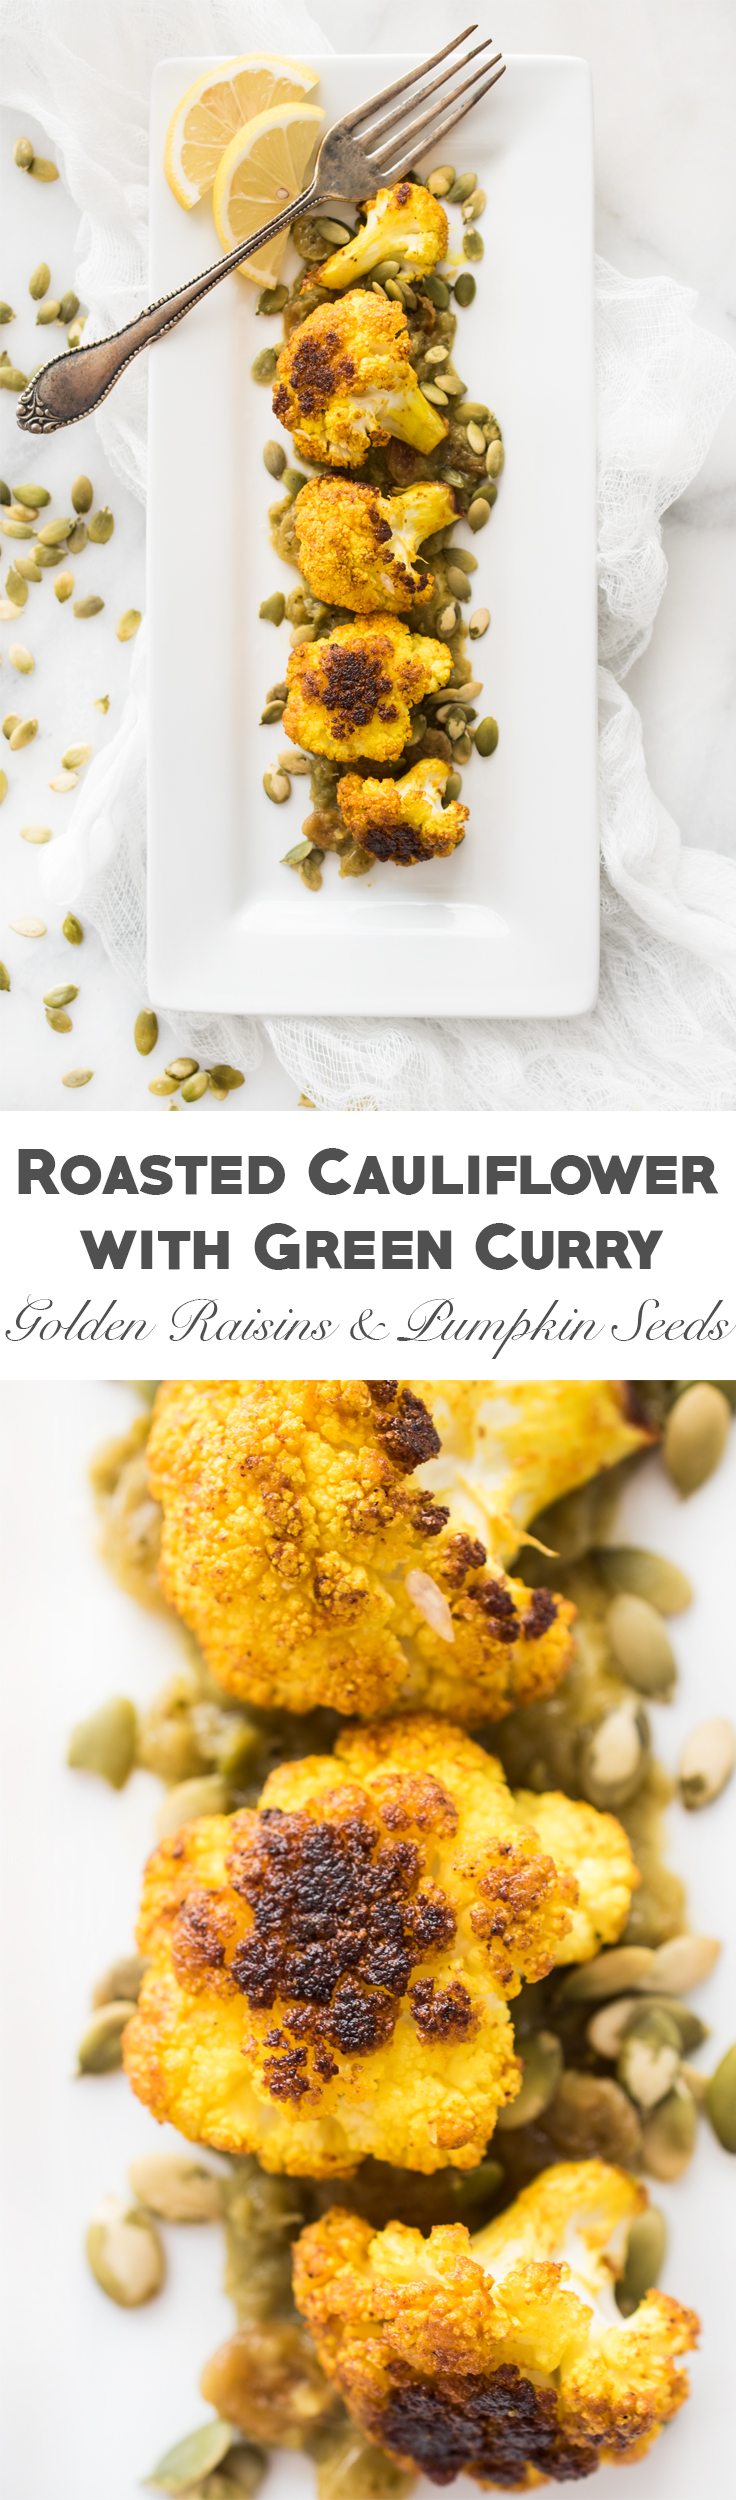 Roasted Cauliflower with Green Curry, Golden Raisins, and Pumpkin Seeds. This side dish has got some serious flavor! 